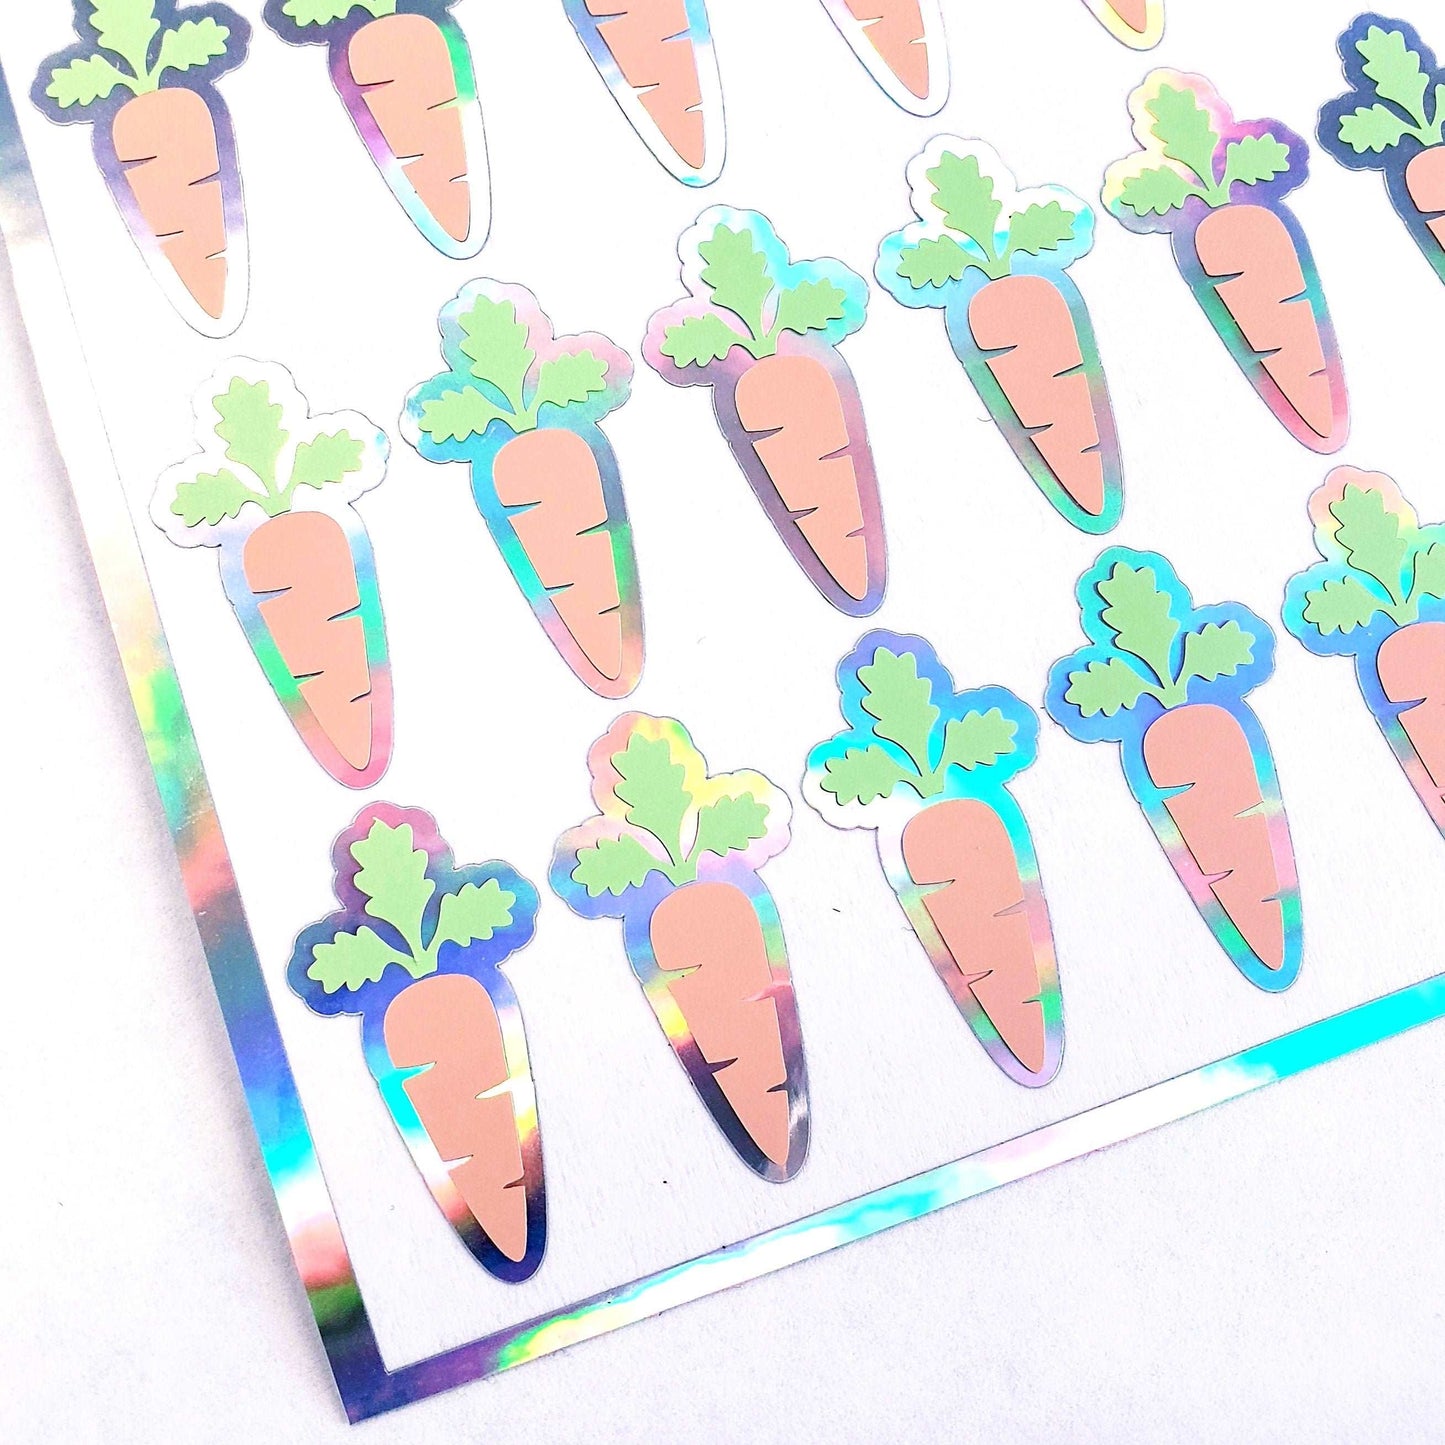 Carrot Stickers, set of 30 pretty orange and green pastel carrot stickers for Easter basket gifts, calendars, planners and recipe cards.